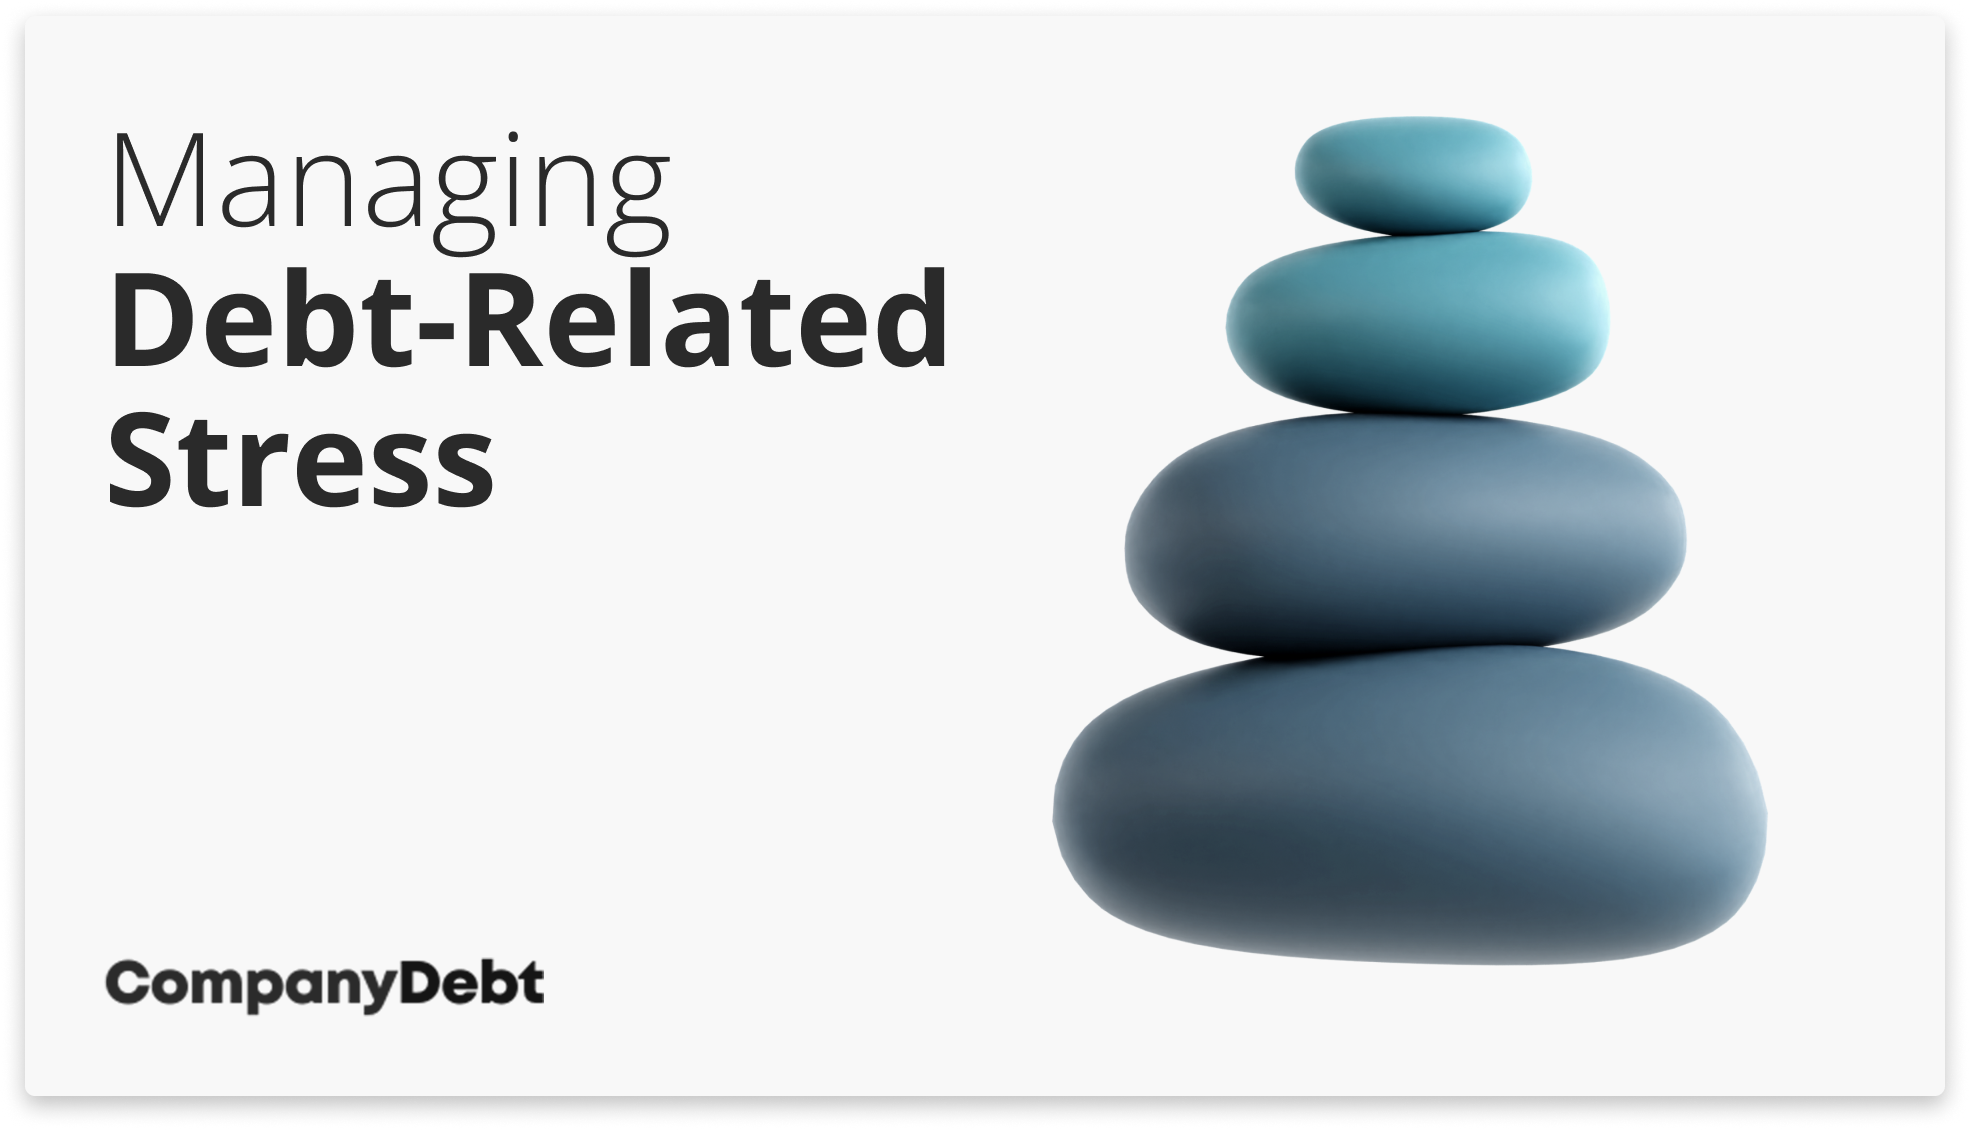 Managing Debt-Related Stress